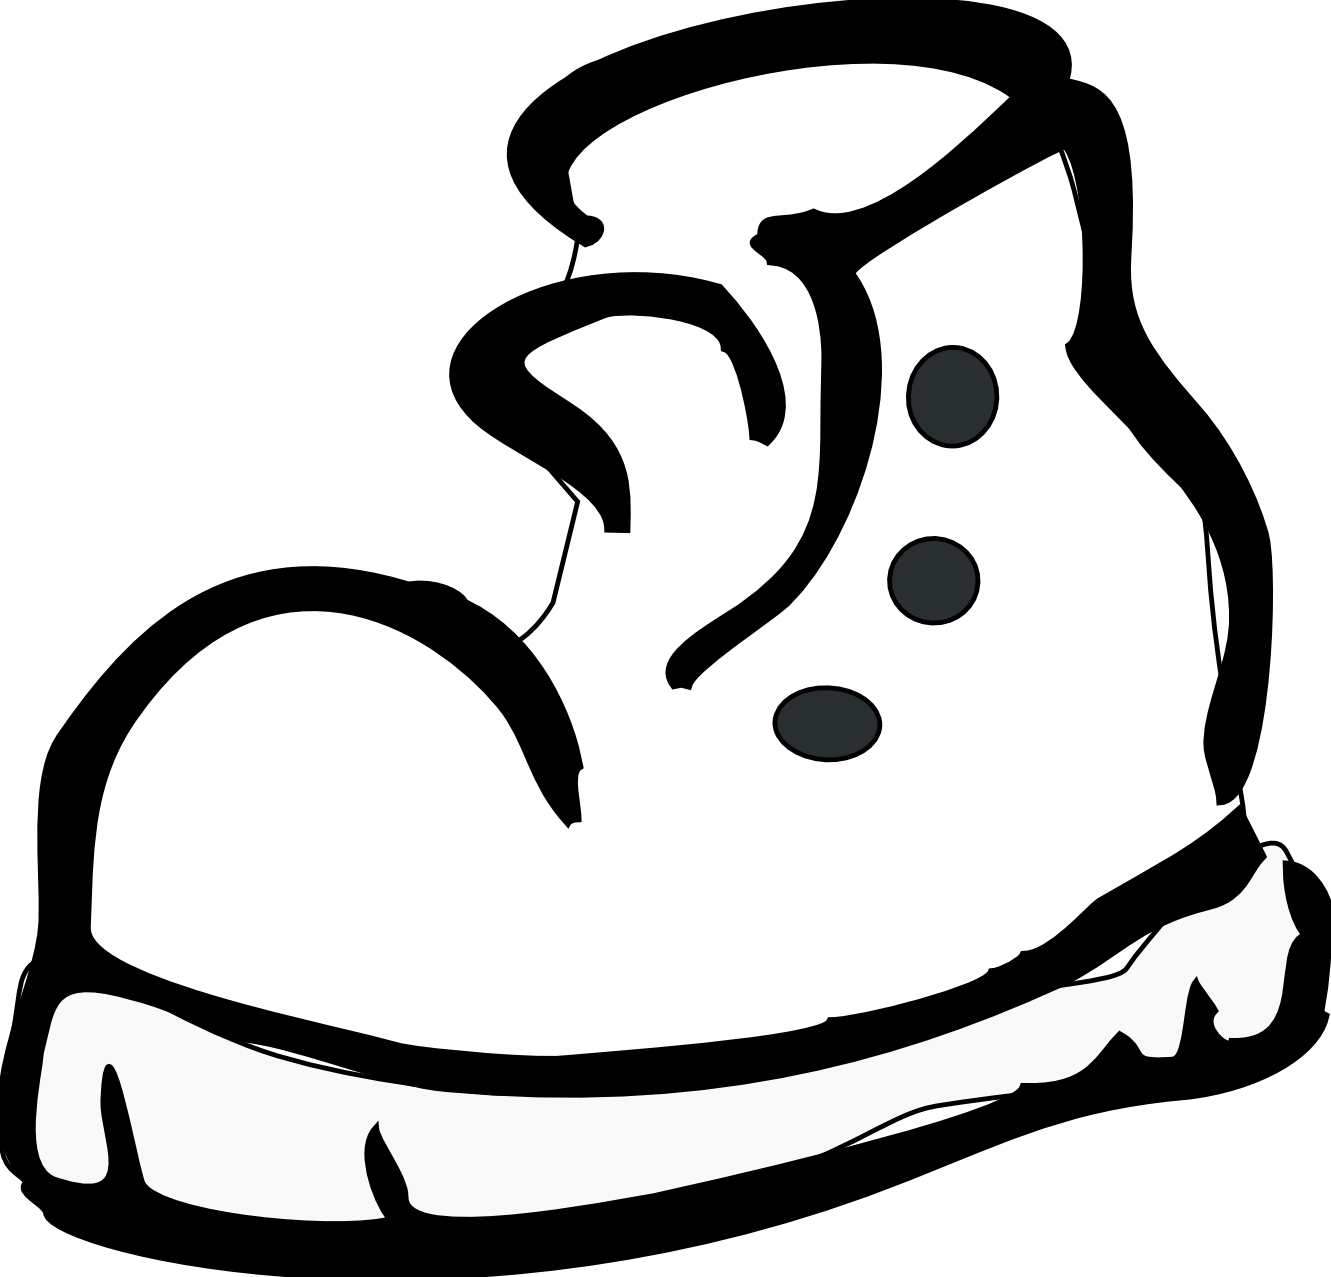 Shoe Images Illustrations Photos Free Download Clipart